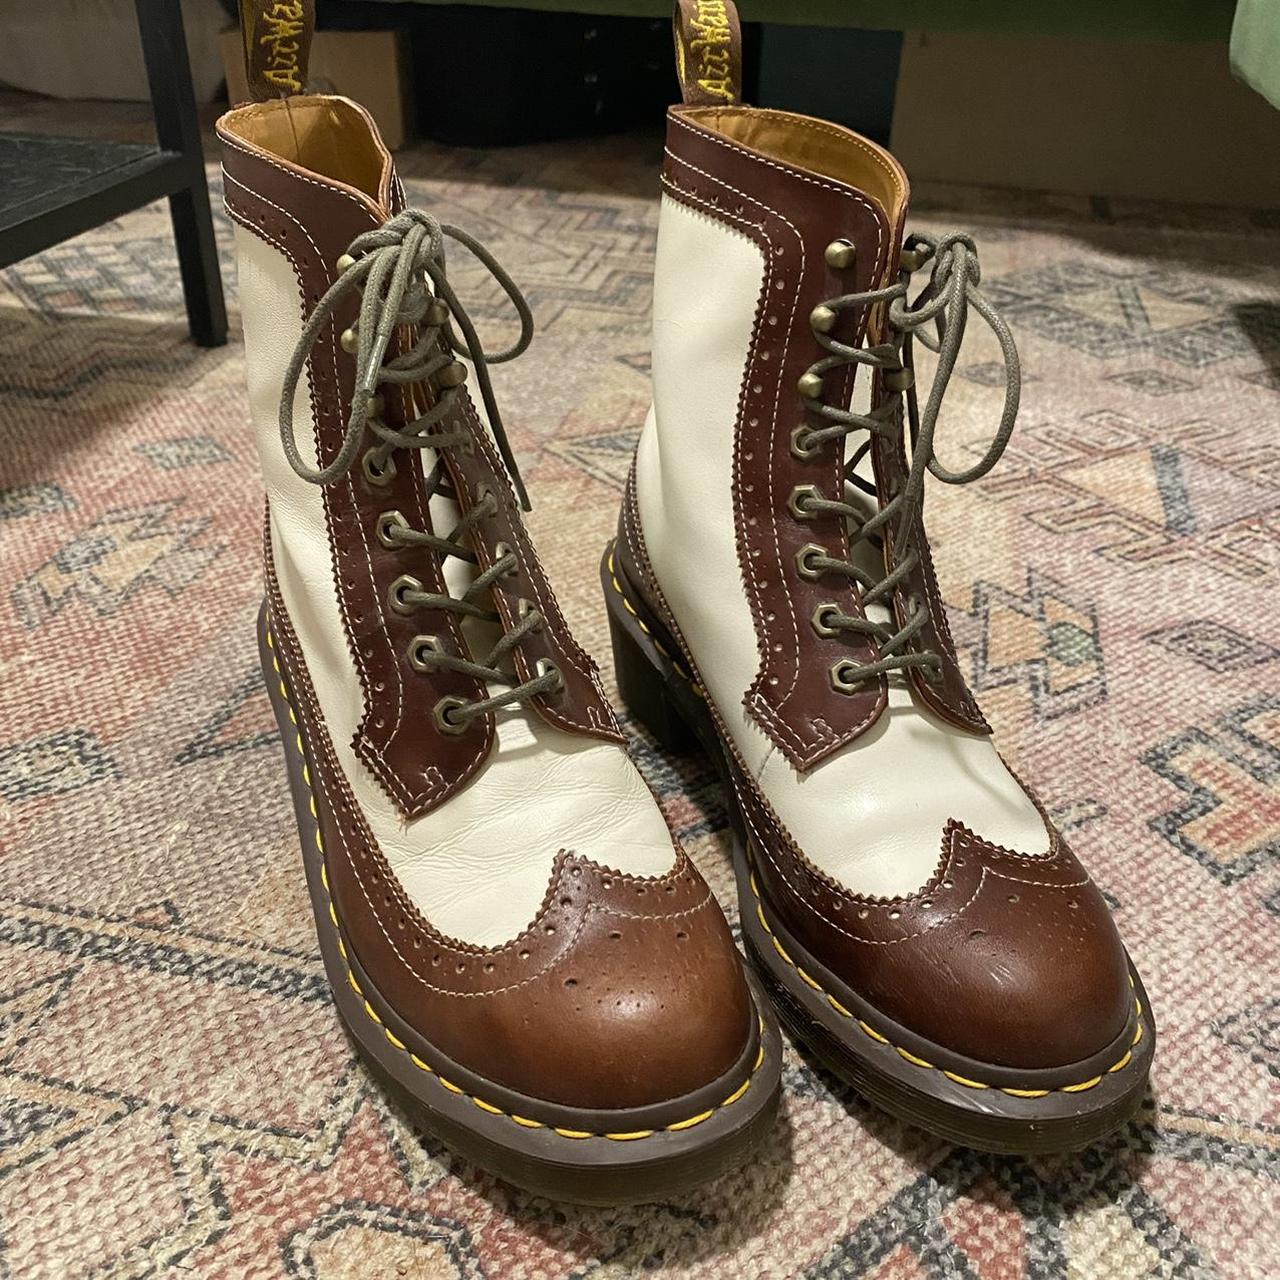 Dr. Martens Women's Brown and White Boots